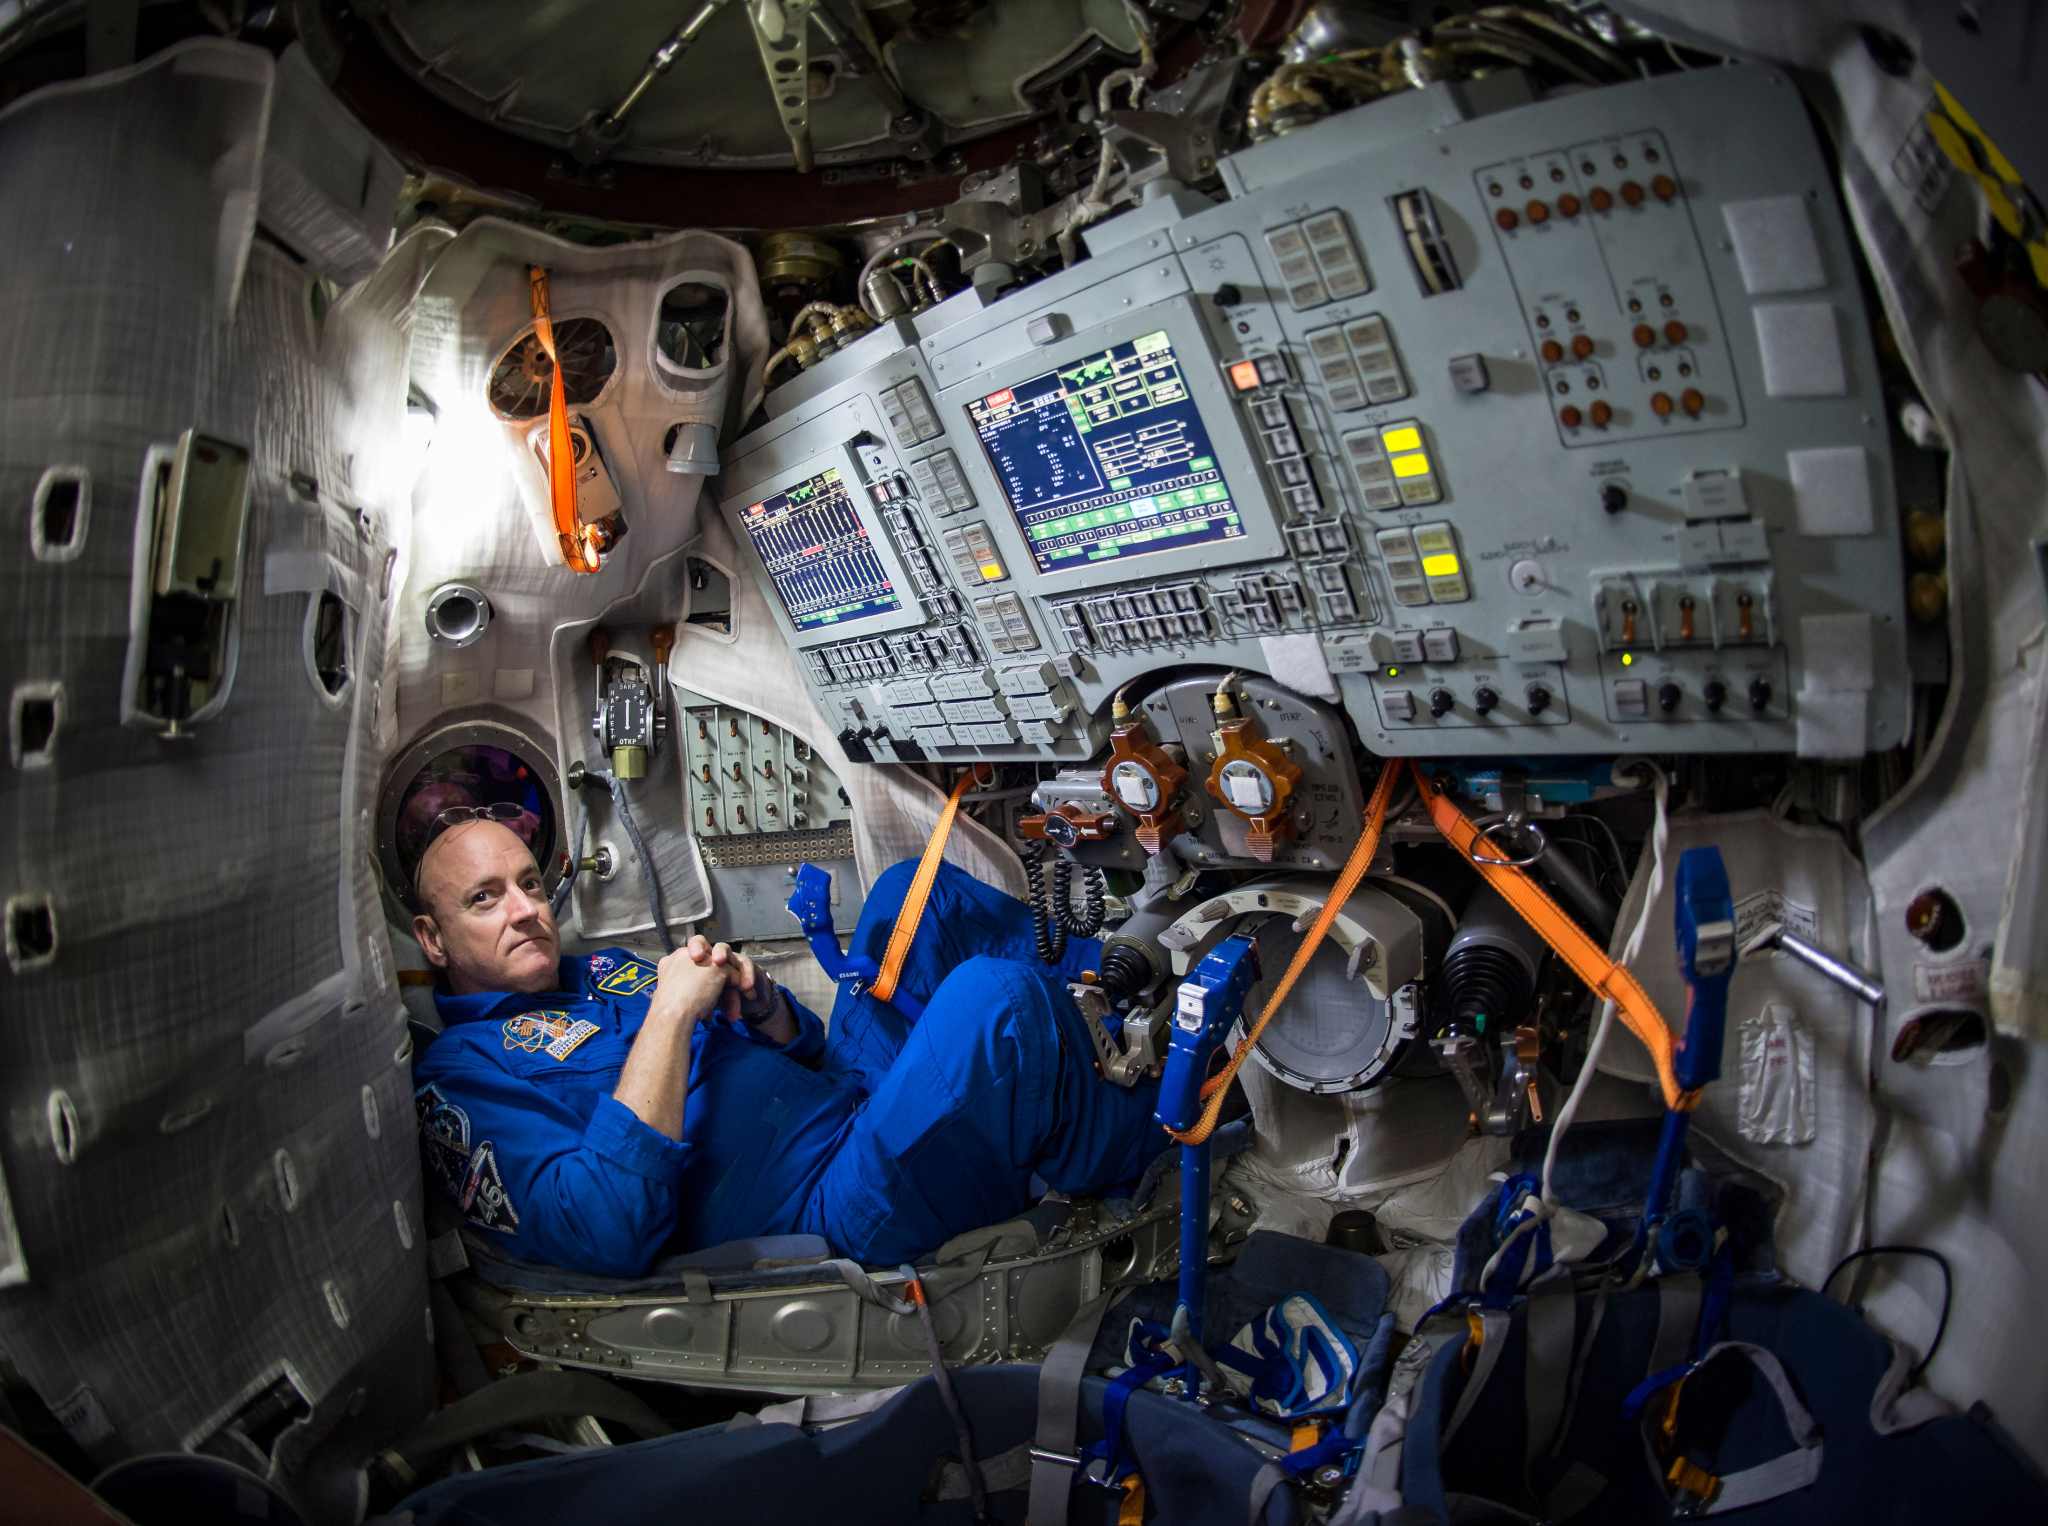 NASA Astronaut Scott Kelly, who spent one-year aboard the International Space Station, is seen confined inside a Soyuz simulator at the Gagarin Cosmonaut Training Center.